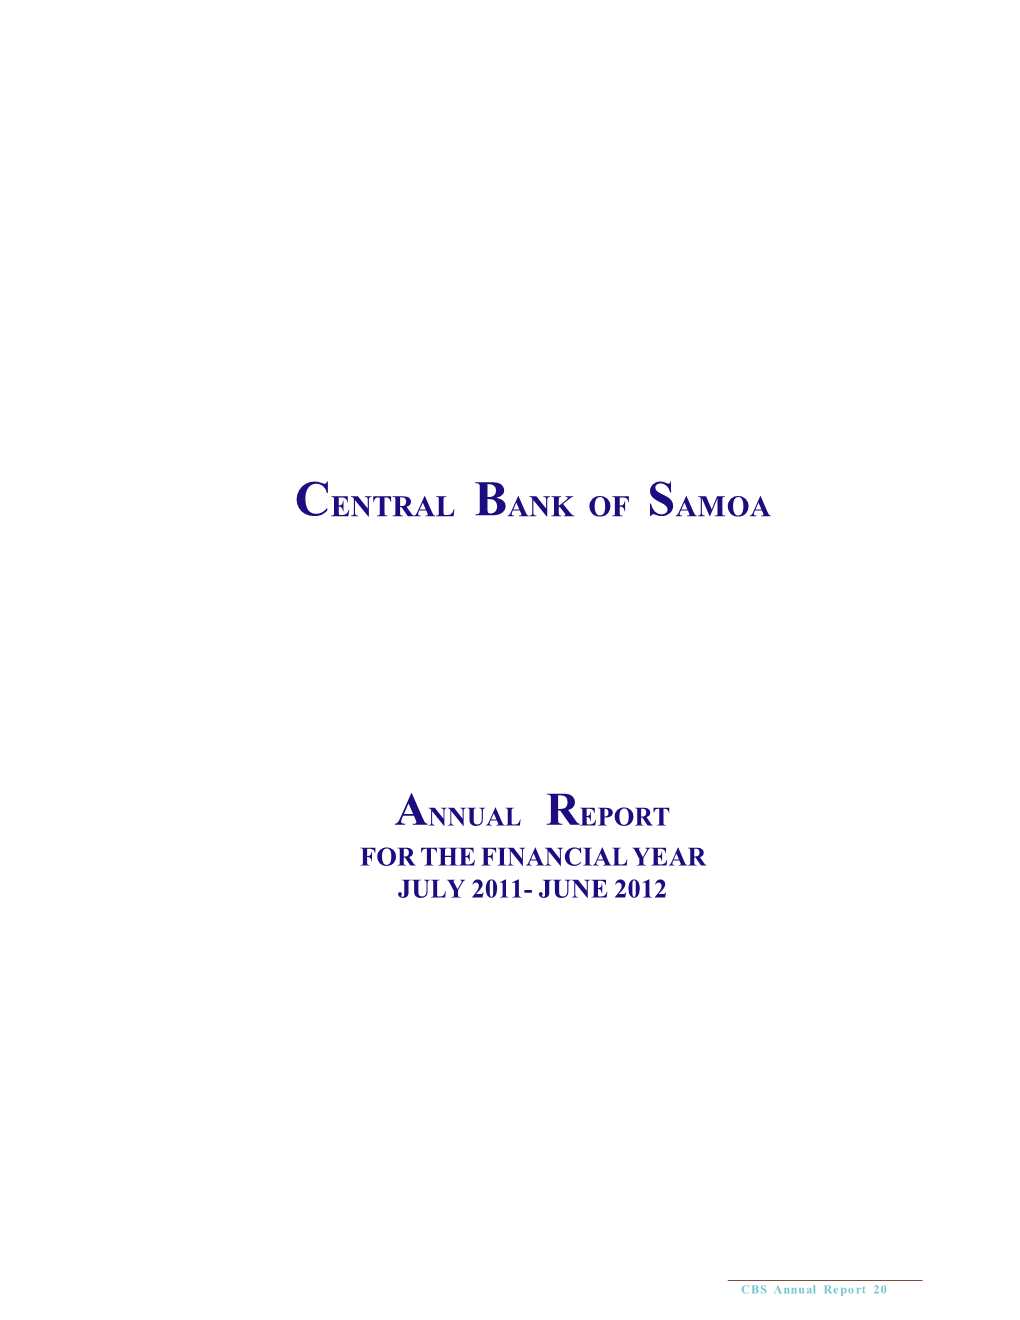 Central Bank of Samoa Annual Report 2011-2012